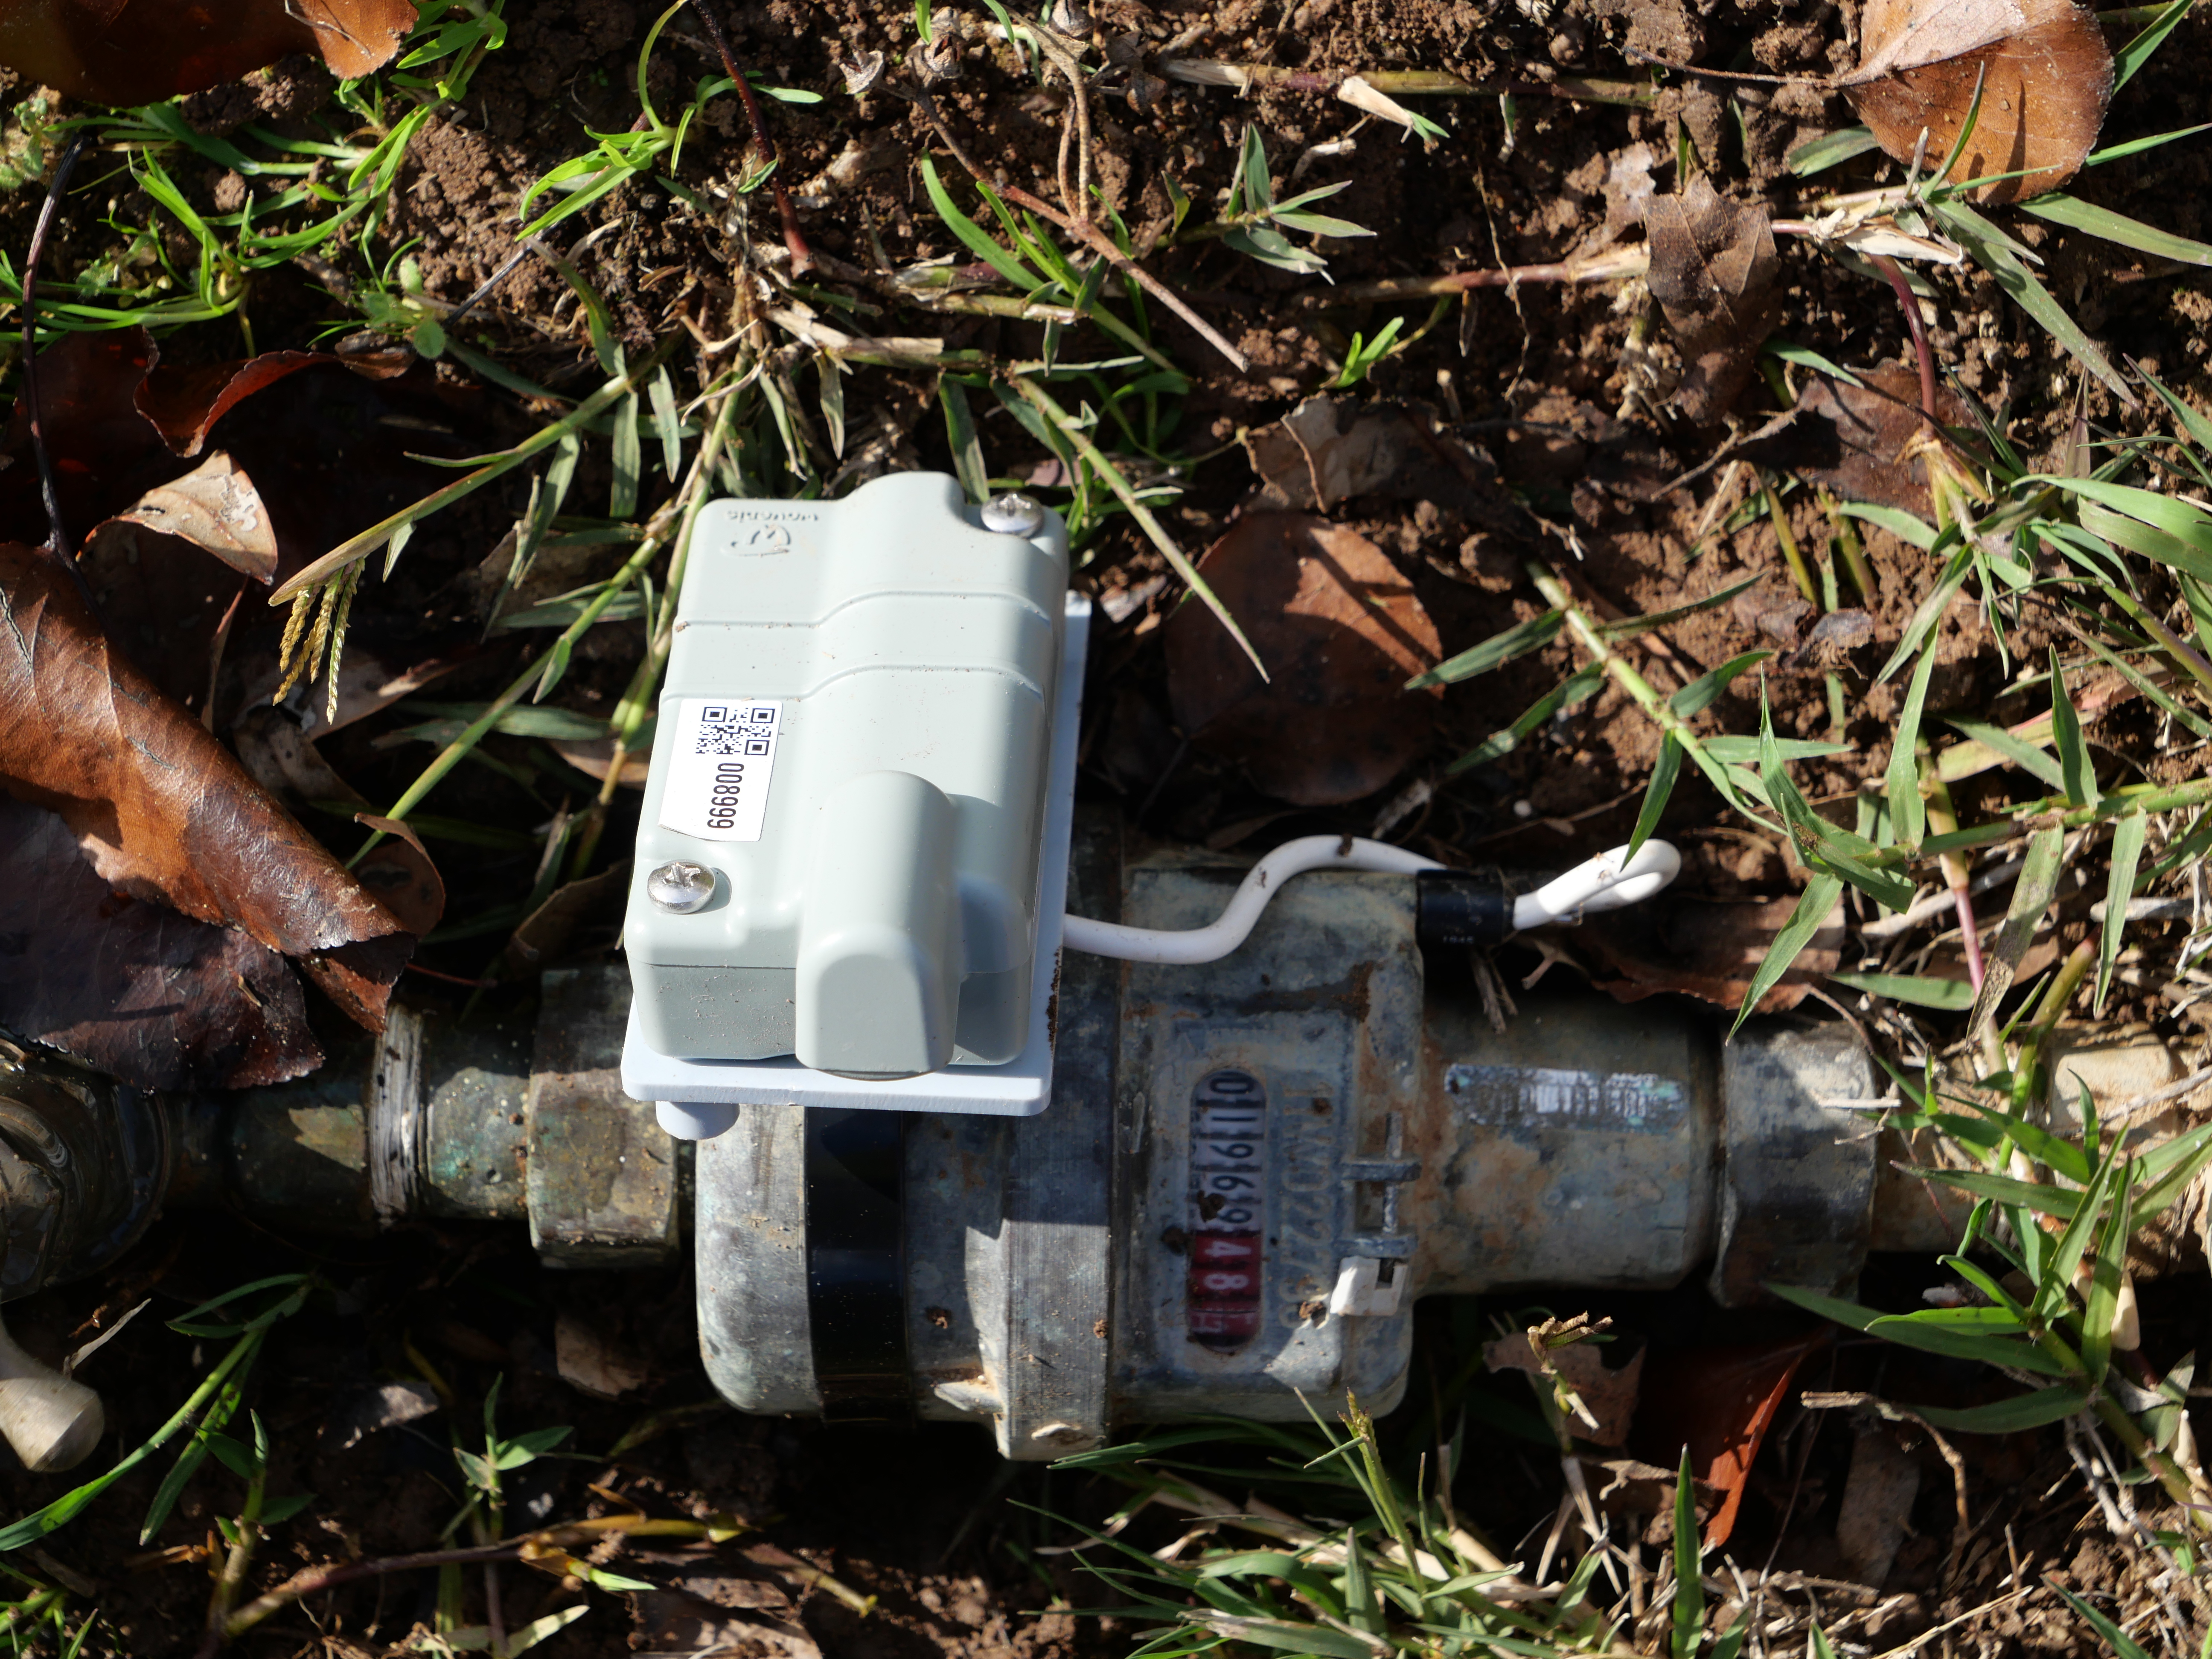 A water meter with digital logger attached